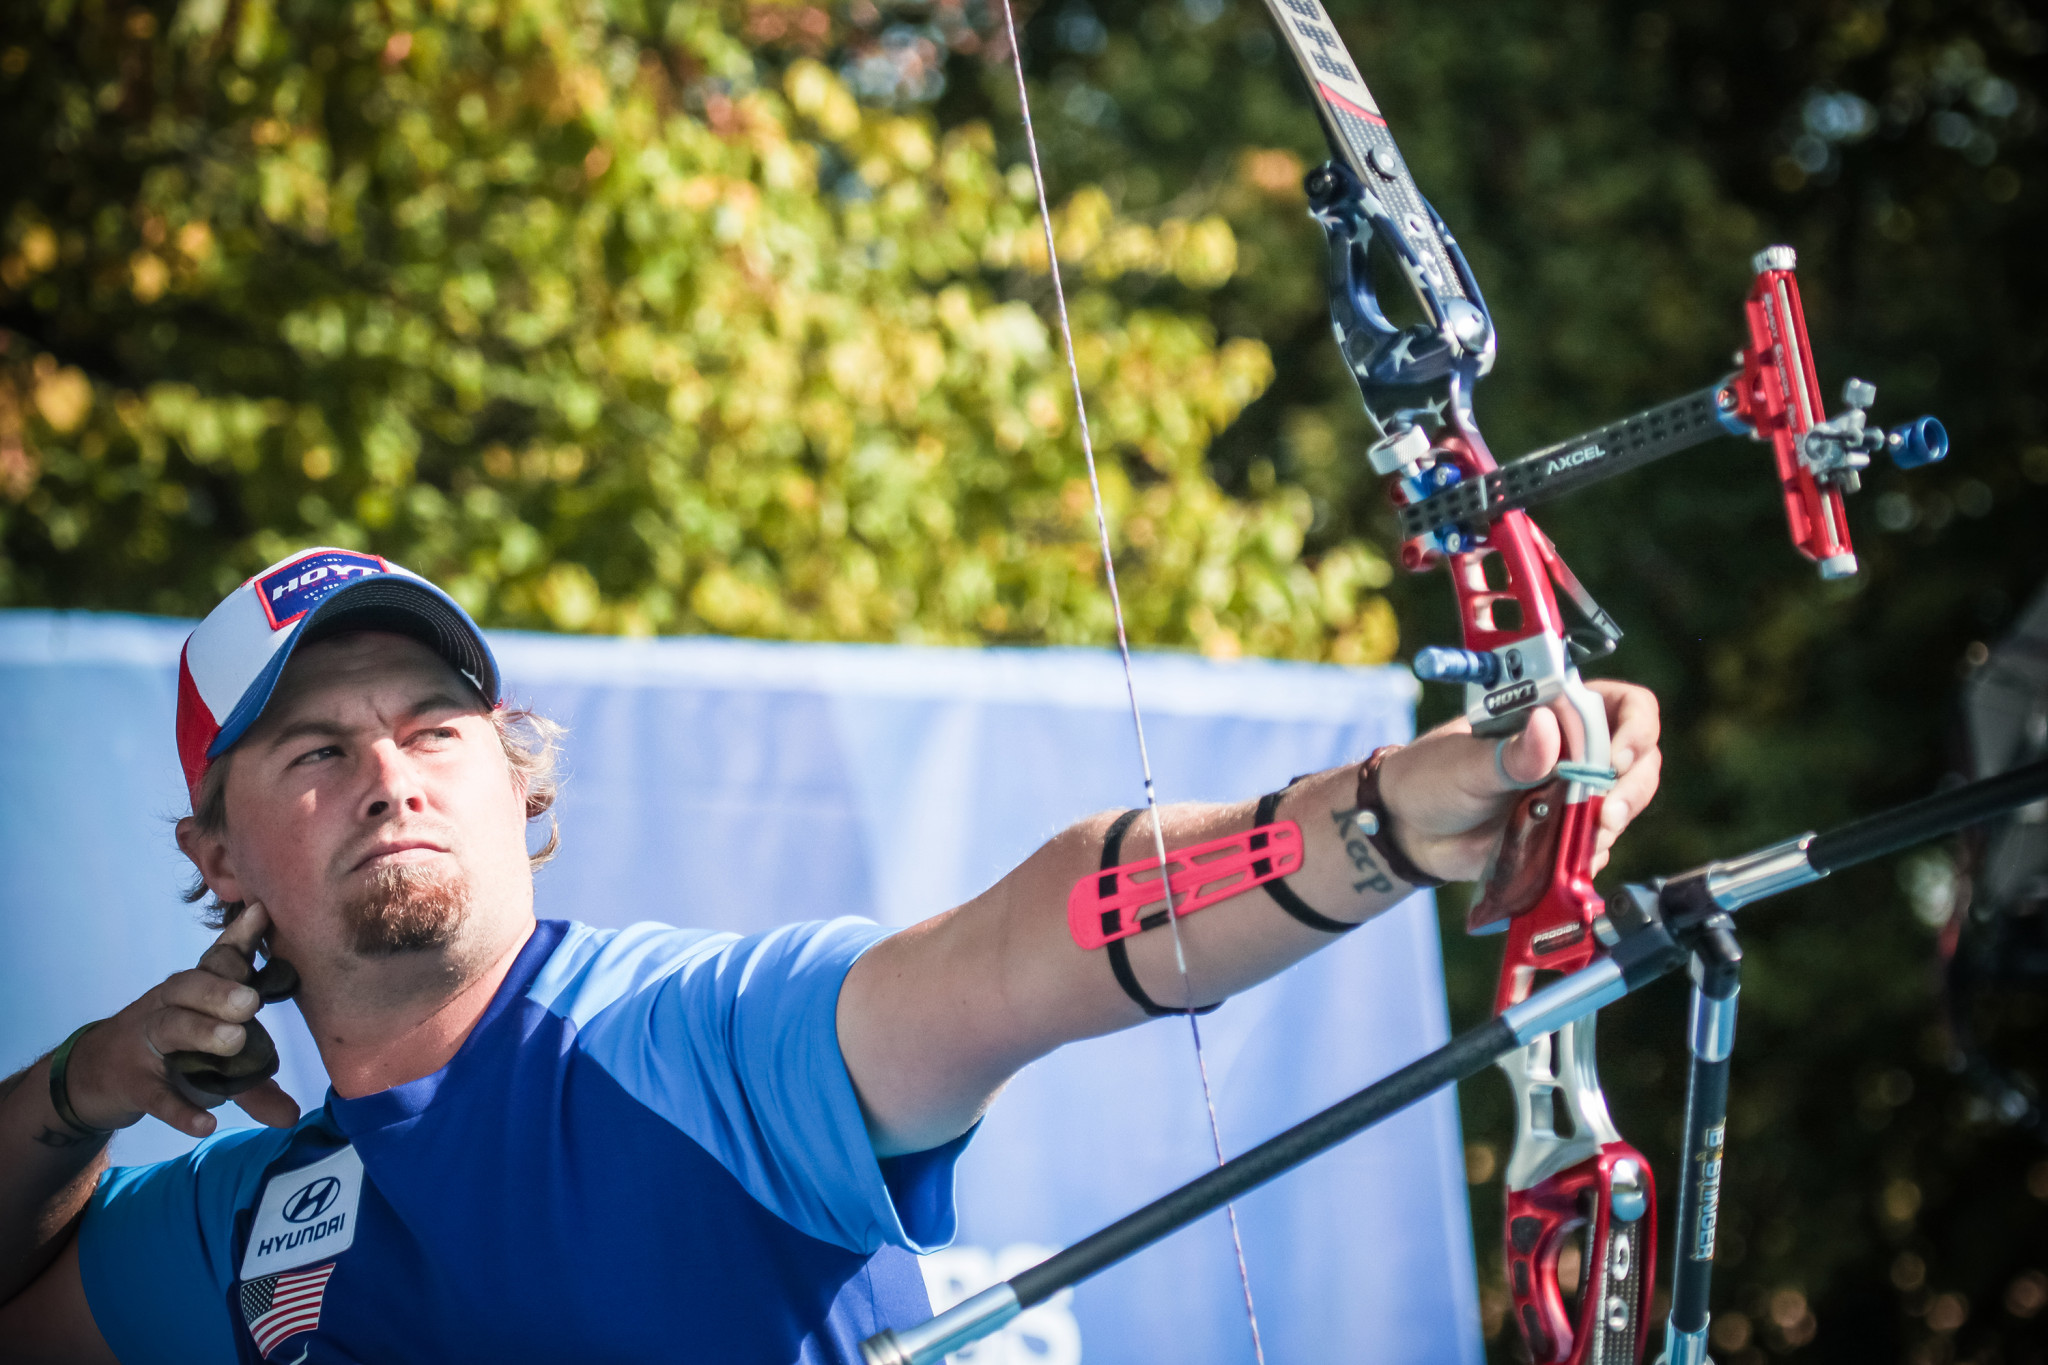  Ellison and Unruh top recurve qualifying at World Archery Field Championships 